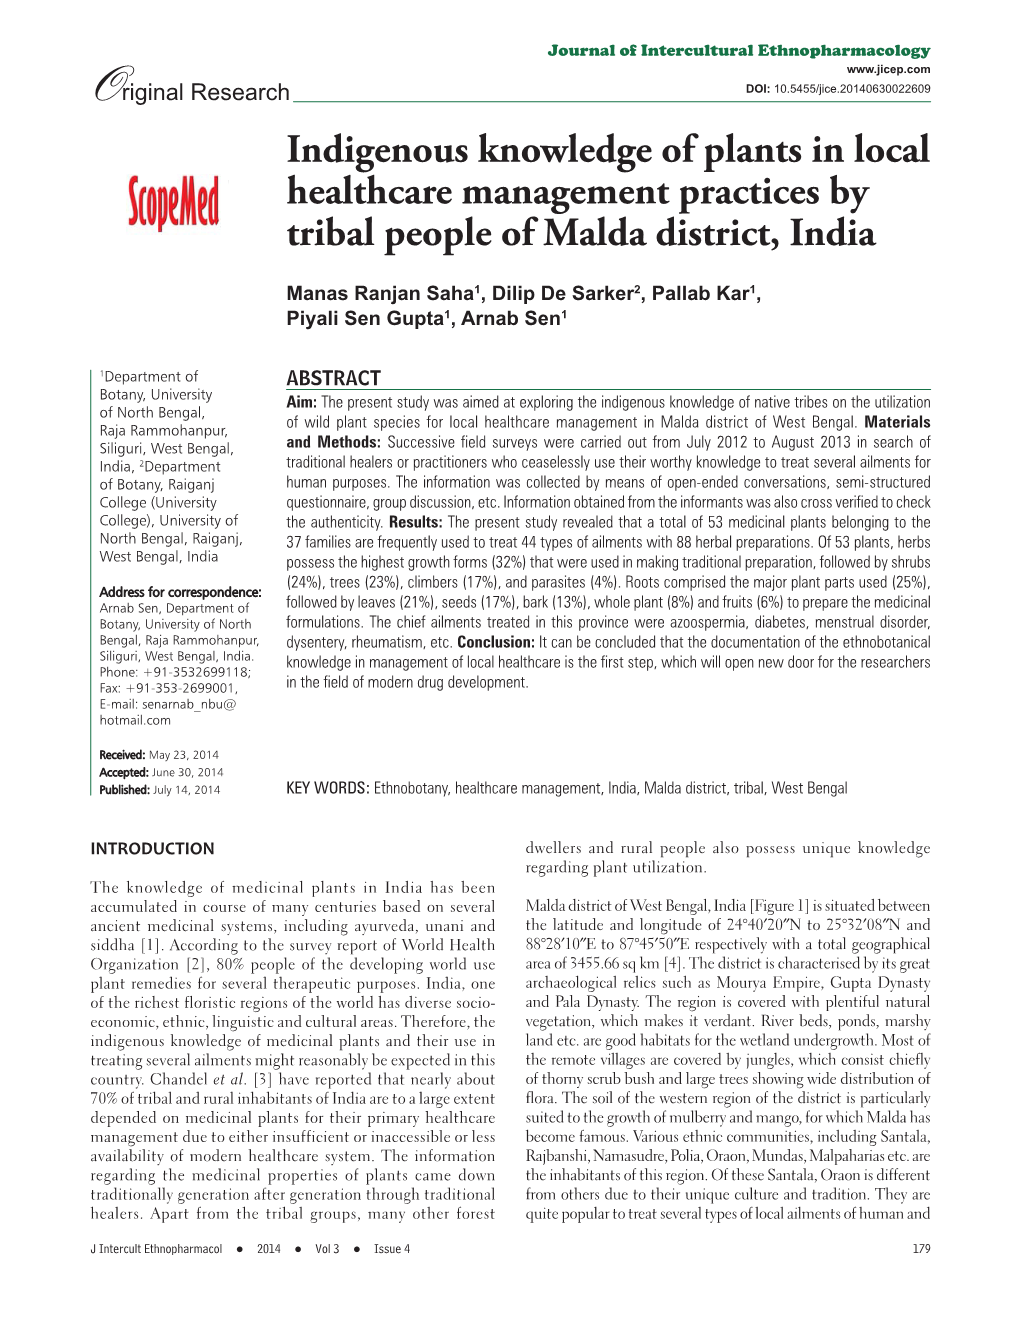 Indigenous Knowledge of Plants in Local Healthcare Management Practices by Tribal People of Malda District, India